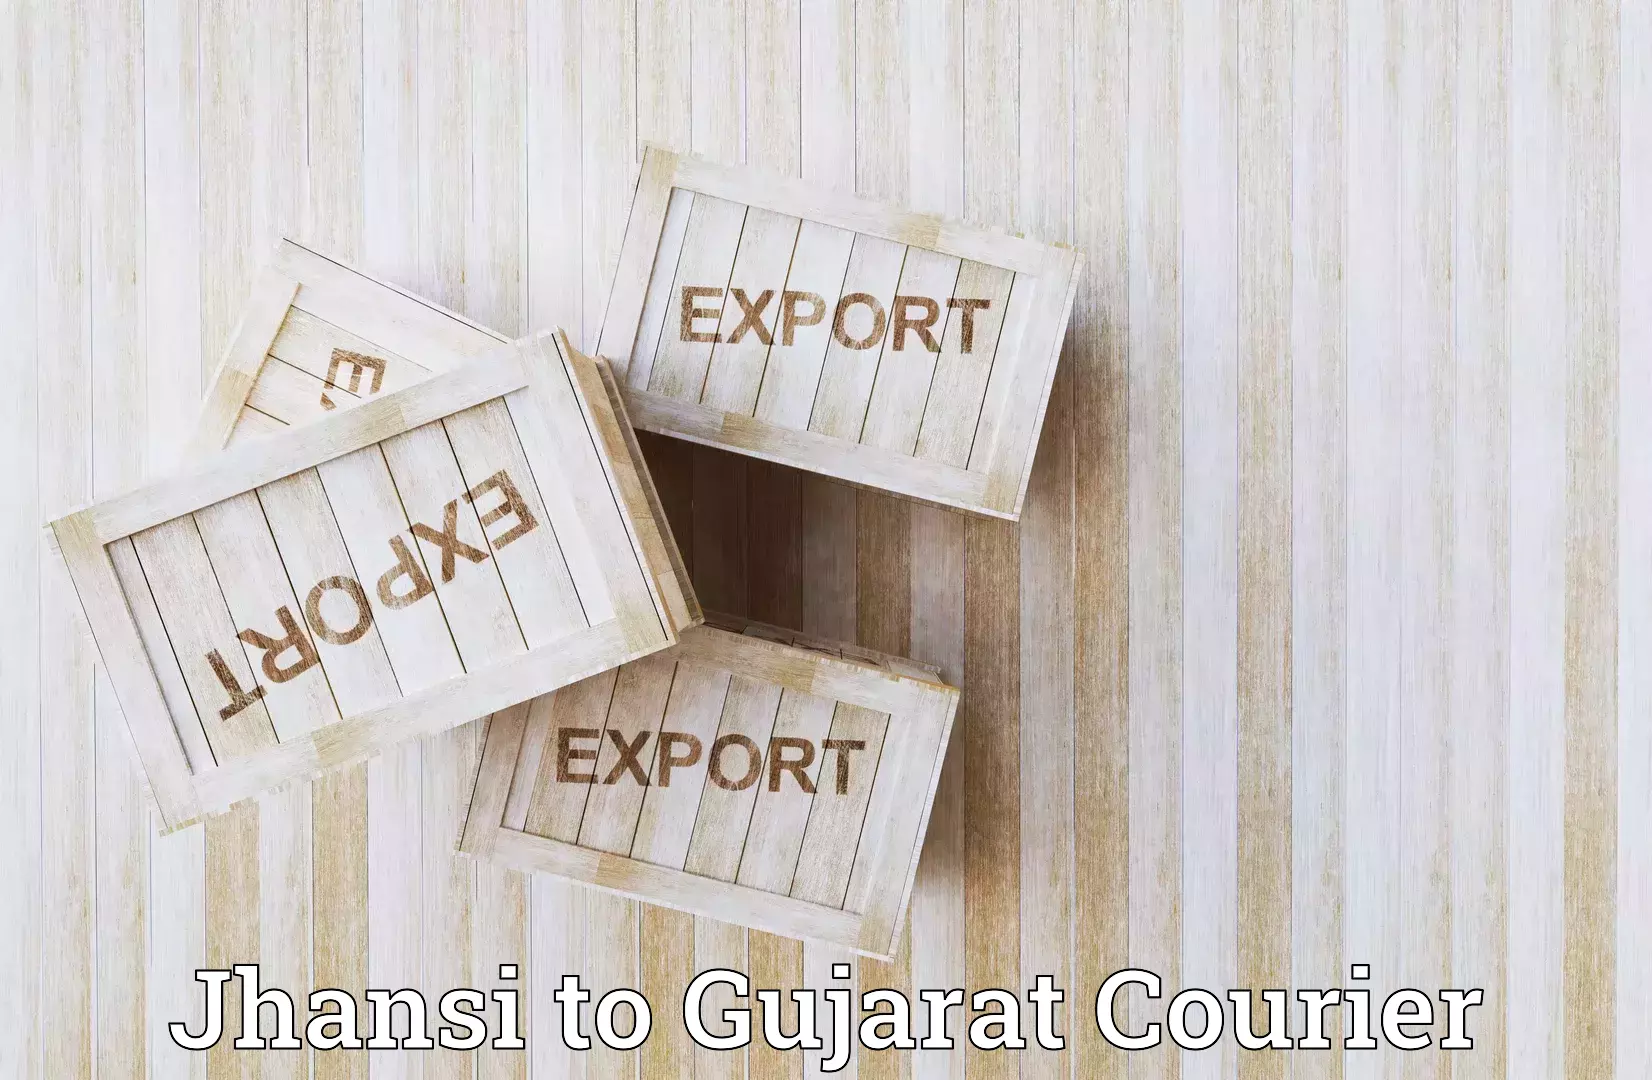 Enhanced shipping experience Jhansi to Veraval